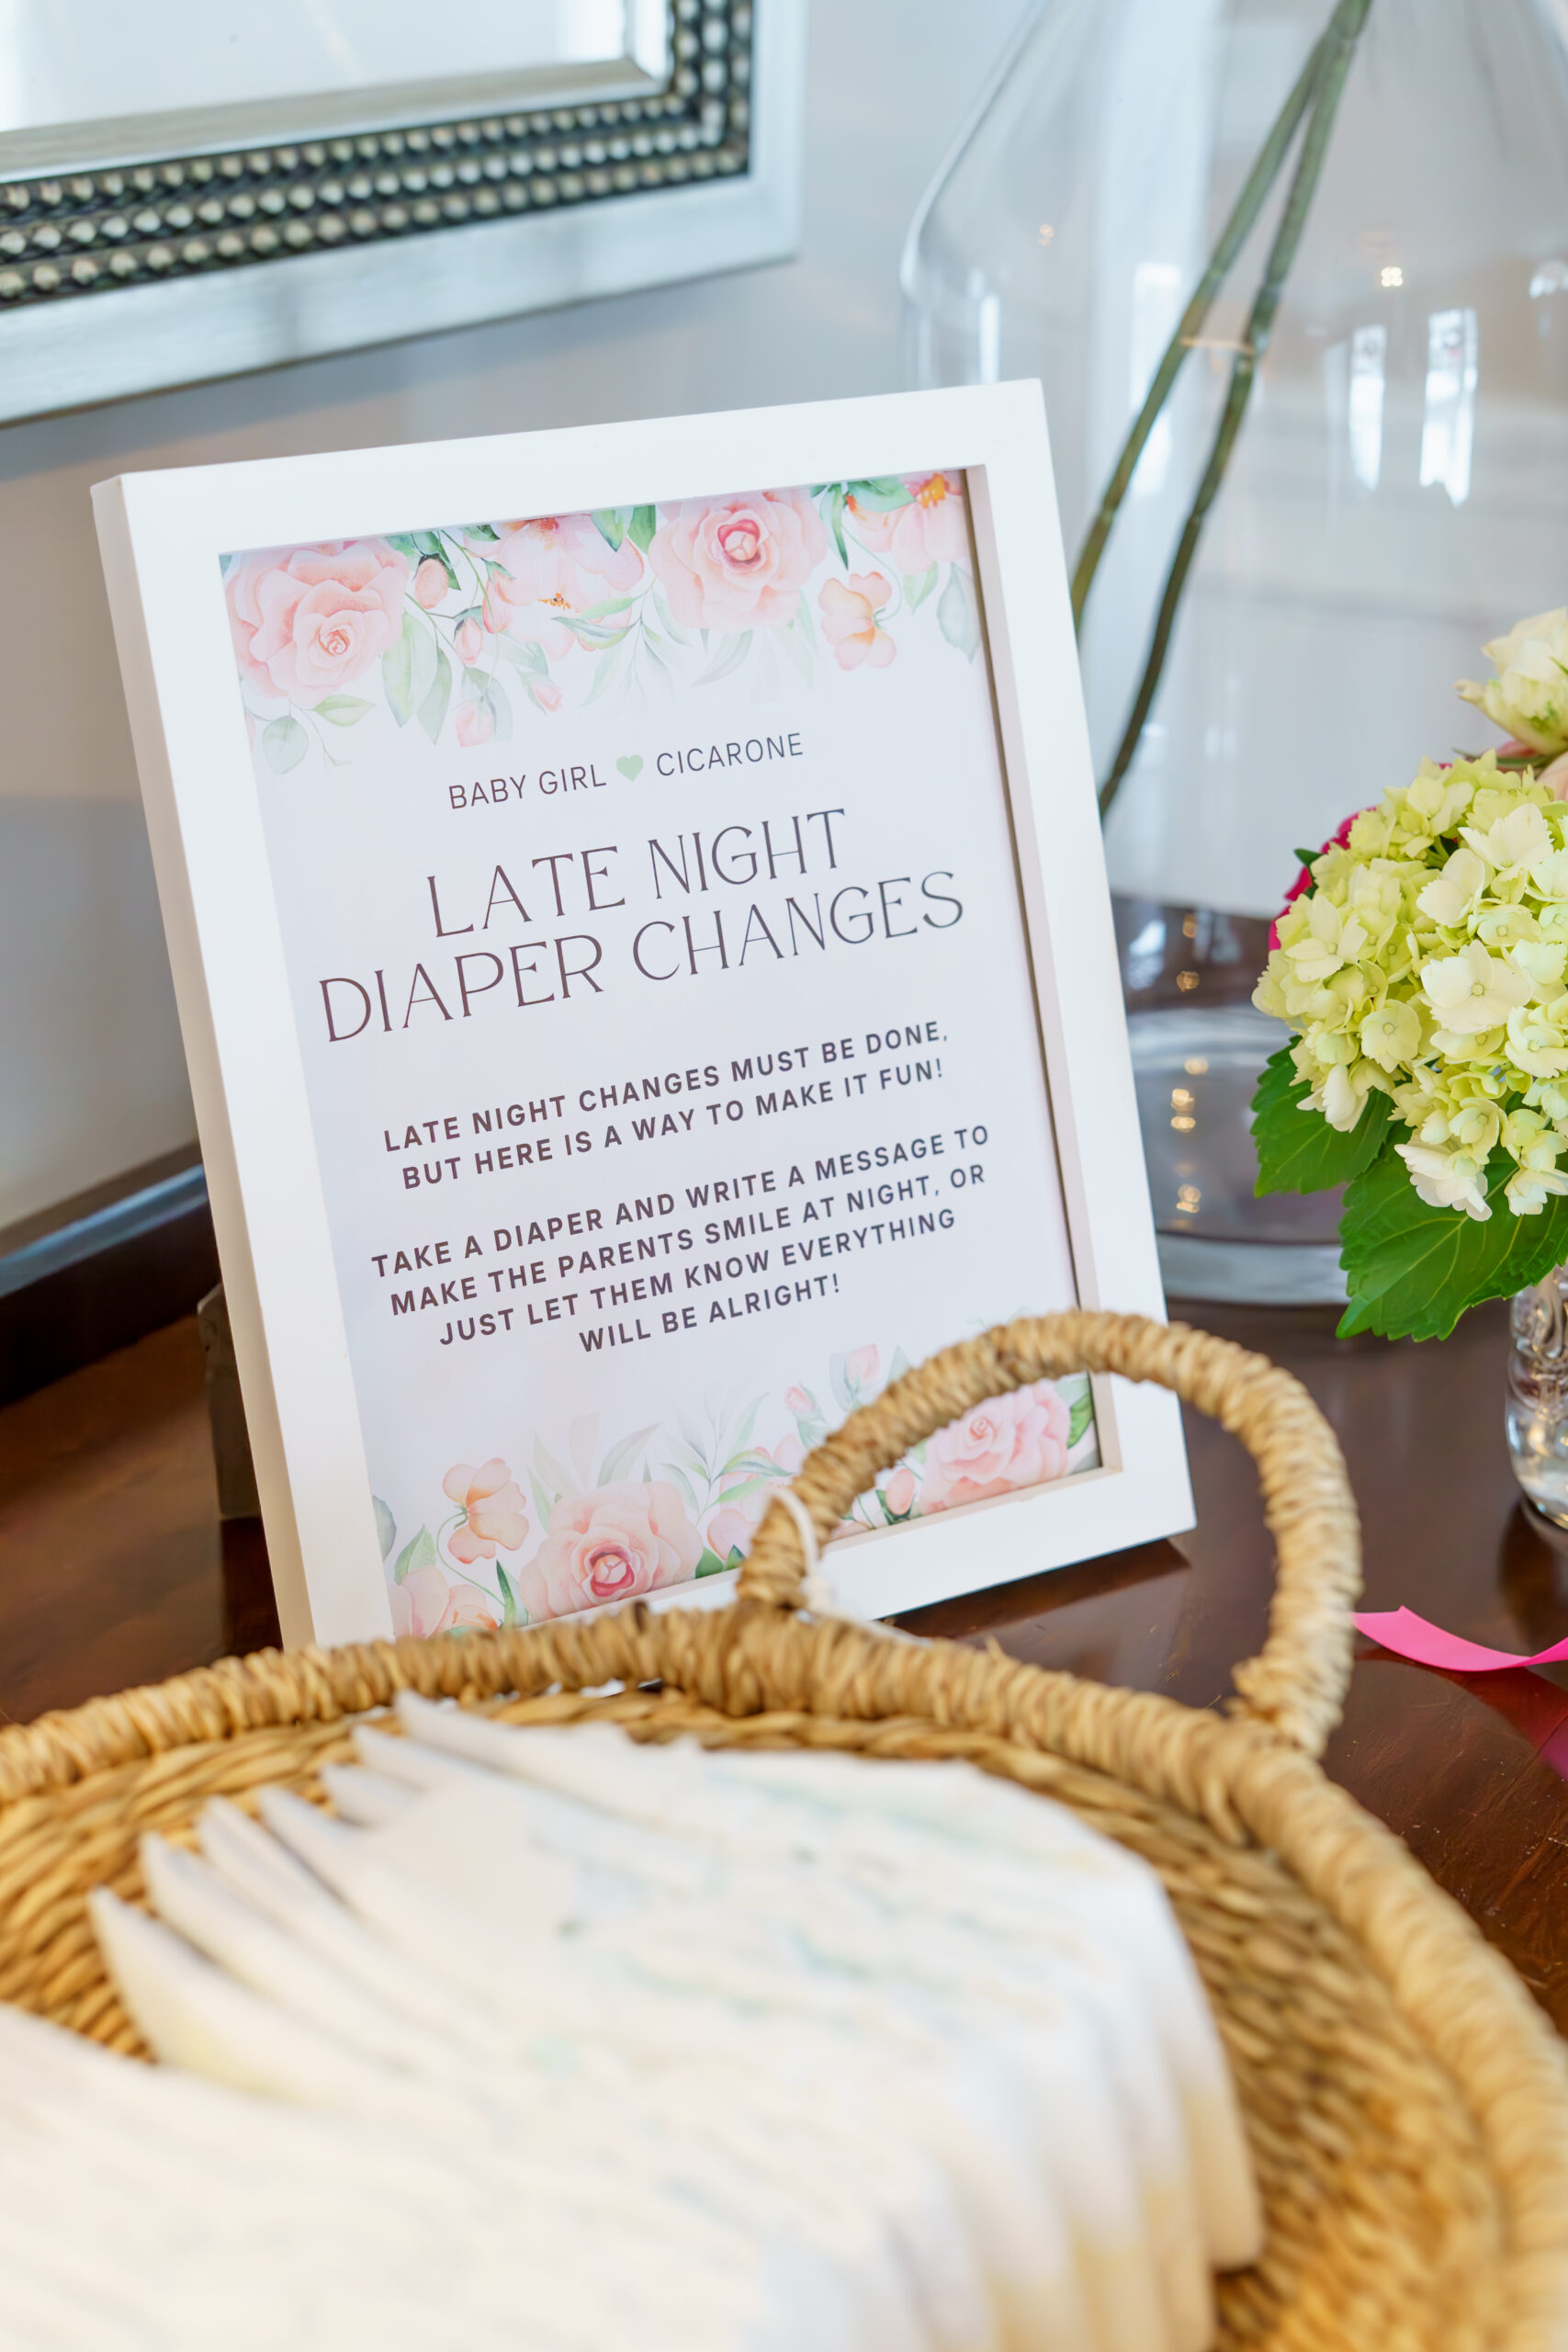 Baby Shower Activity - Leave Notes on Diapers for Parents to Read Later